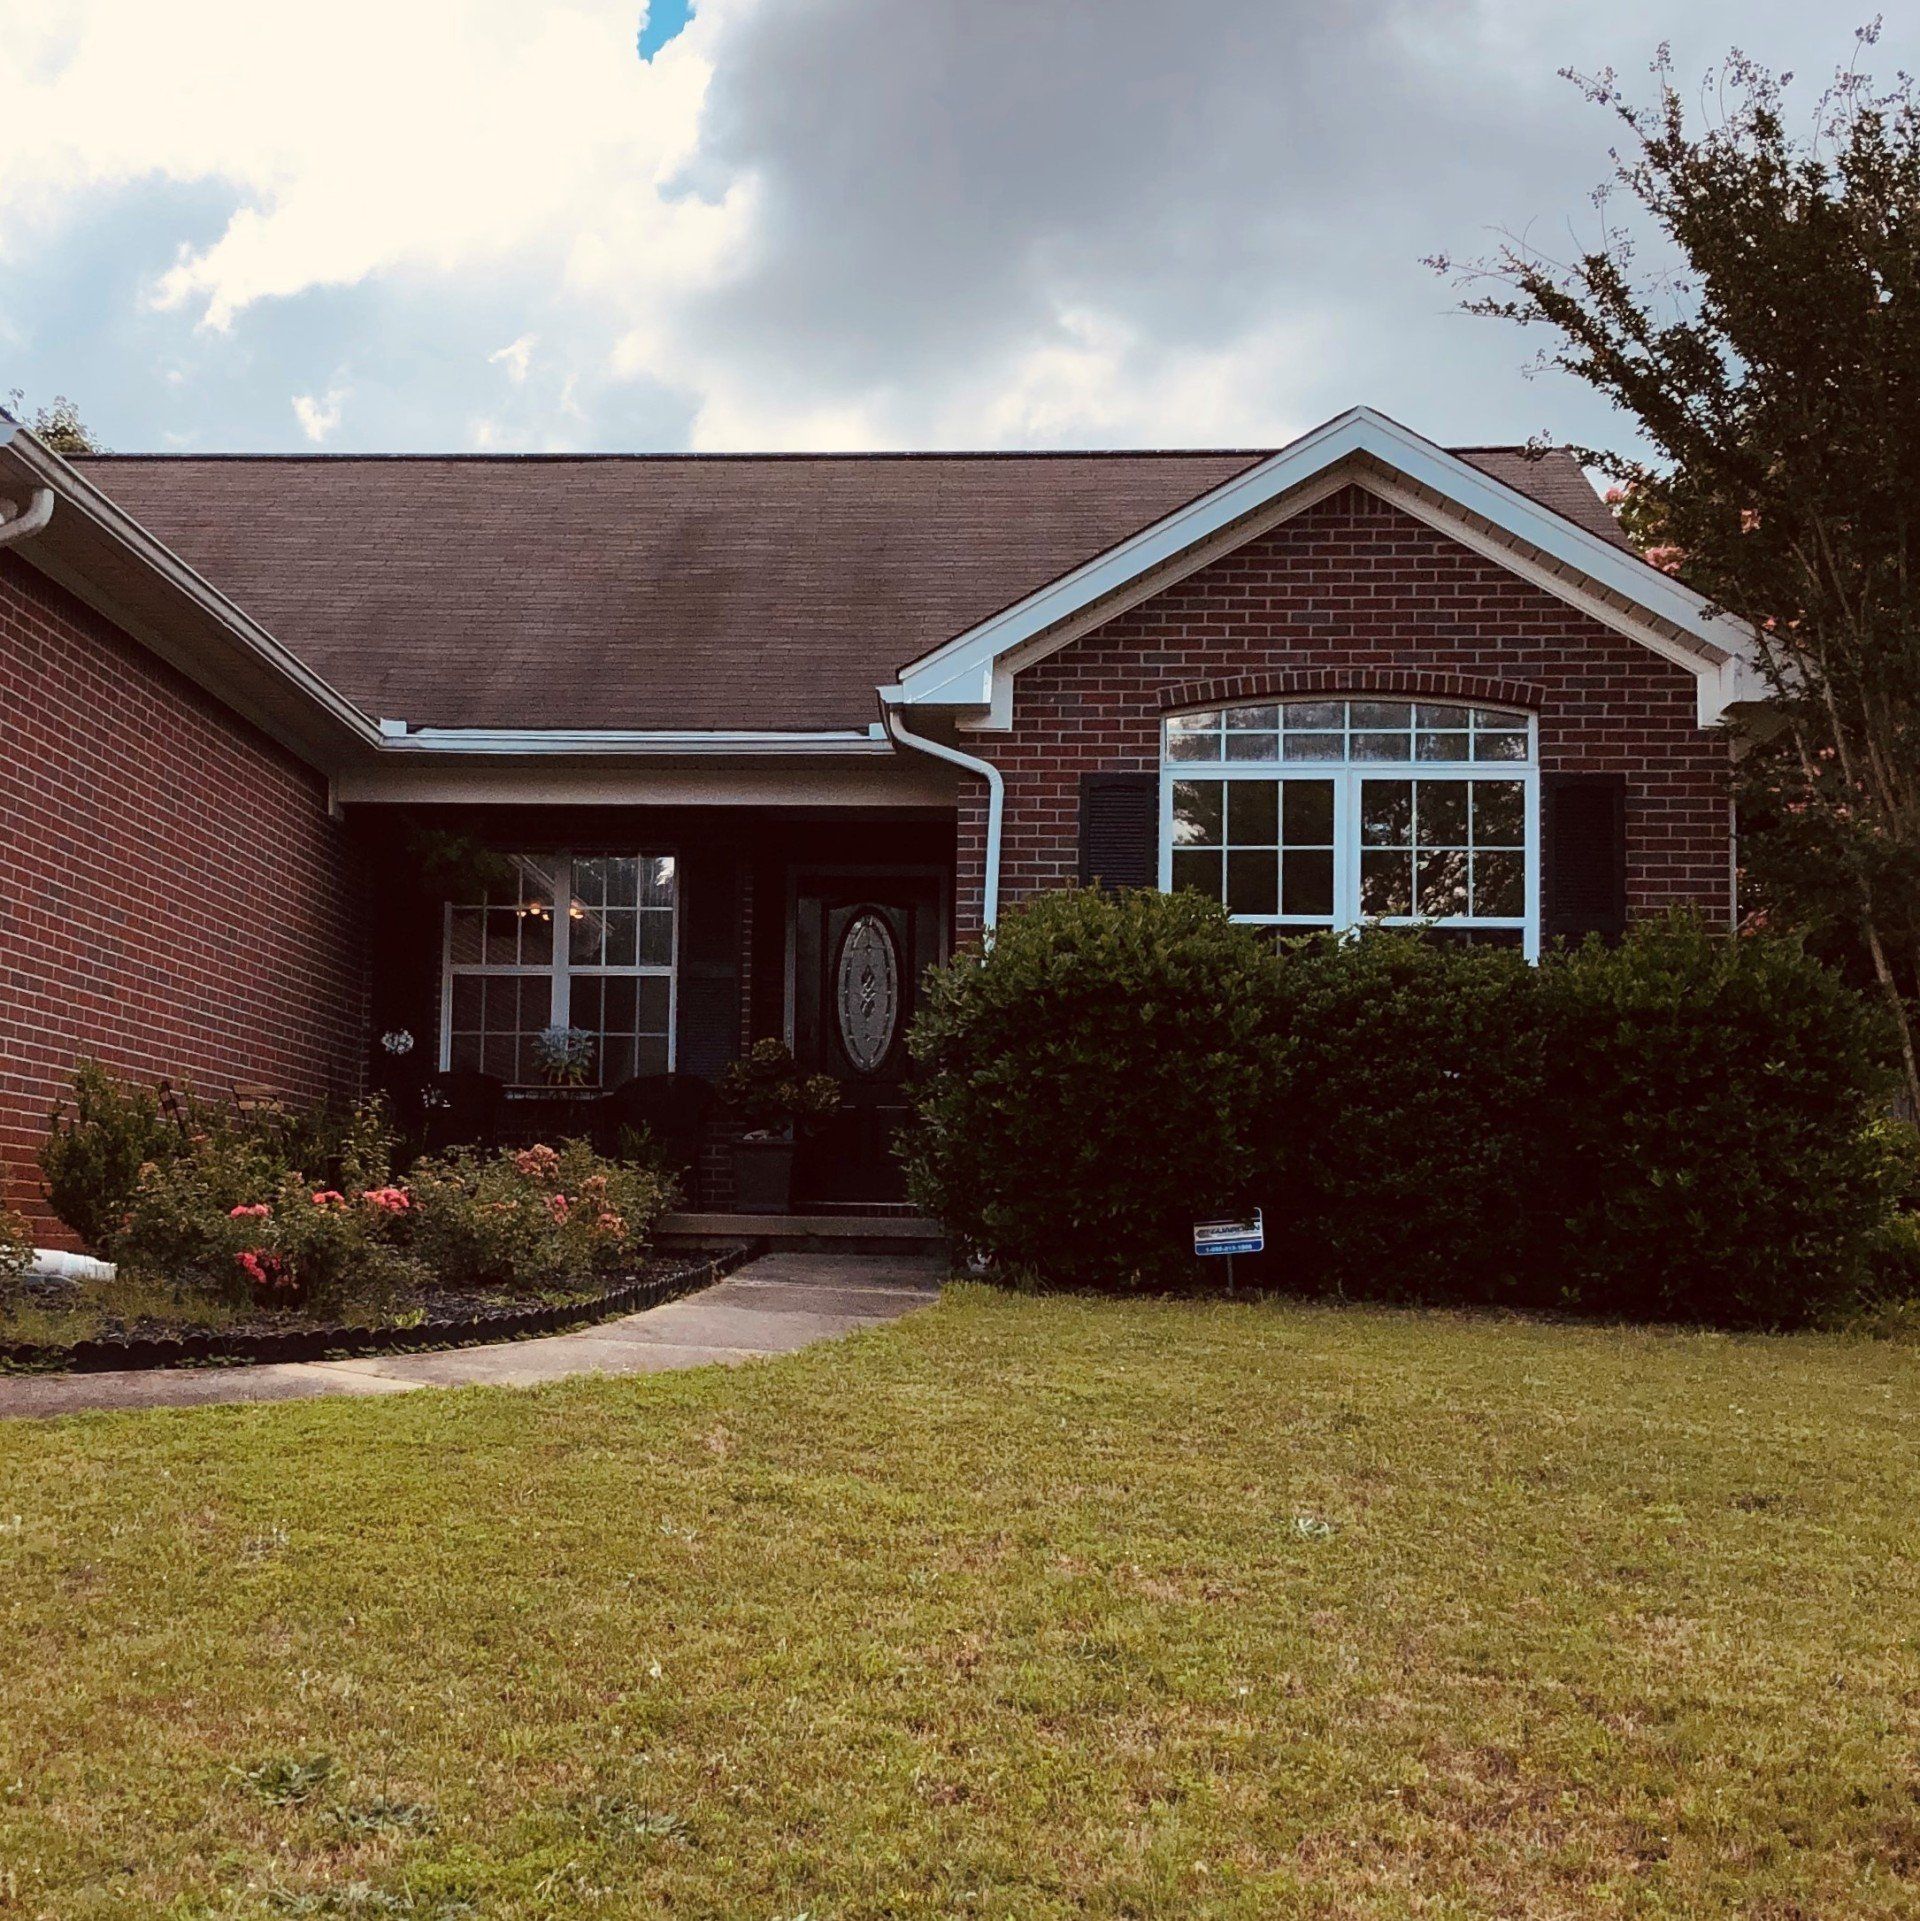 Home Window Tinting in Auburn AL - After Leading Energy Efficiency & UV Protection was gained with SPF Tint on 6.5.2020 in Auburn, AL